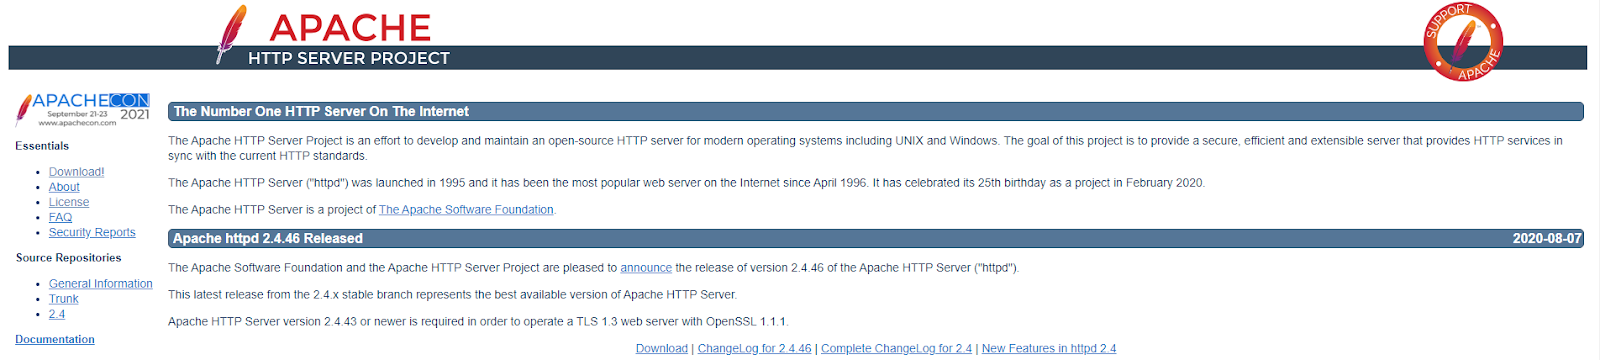 Screenshot of the Apache home page